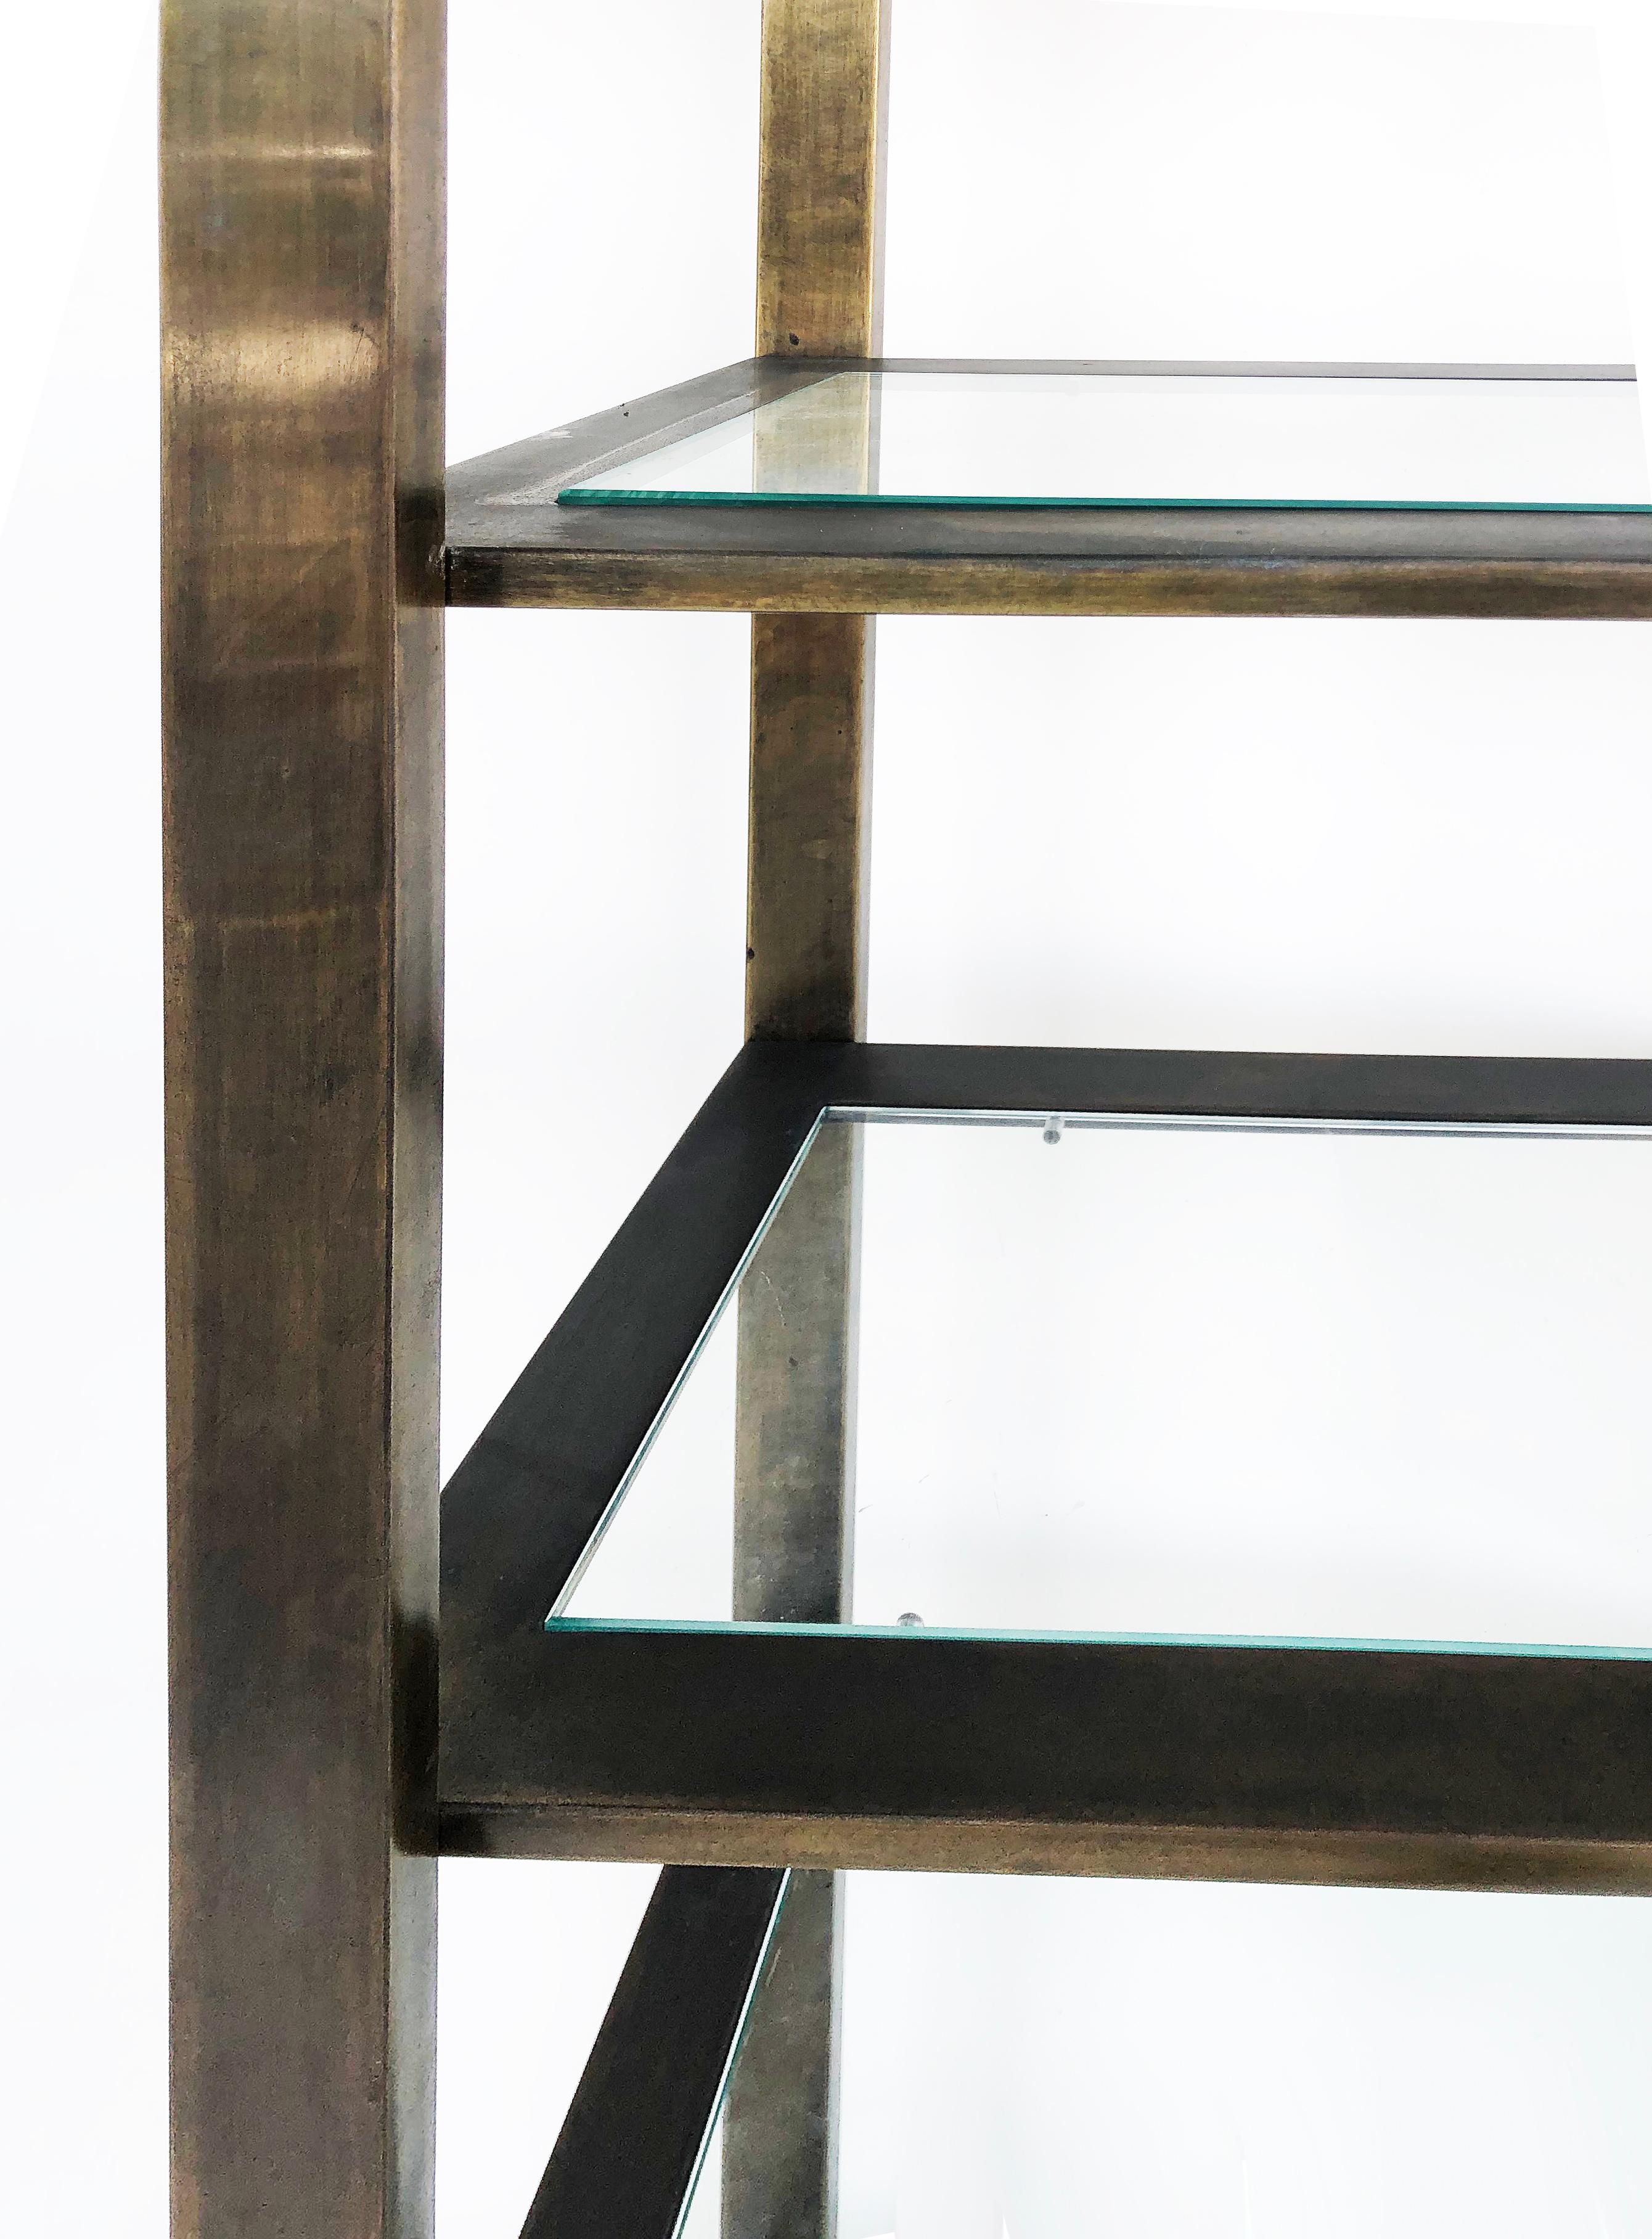 Bronzed Finish Mid-Century Modern Etagere Metal Shelving with Glass Shelves 3